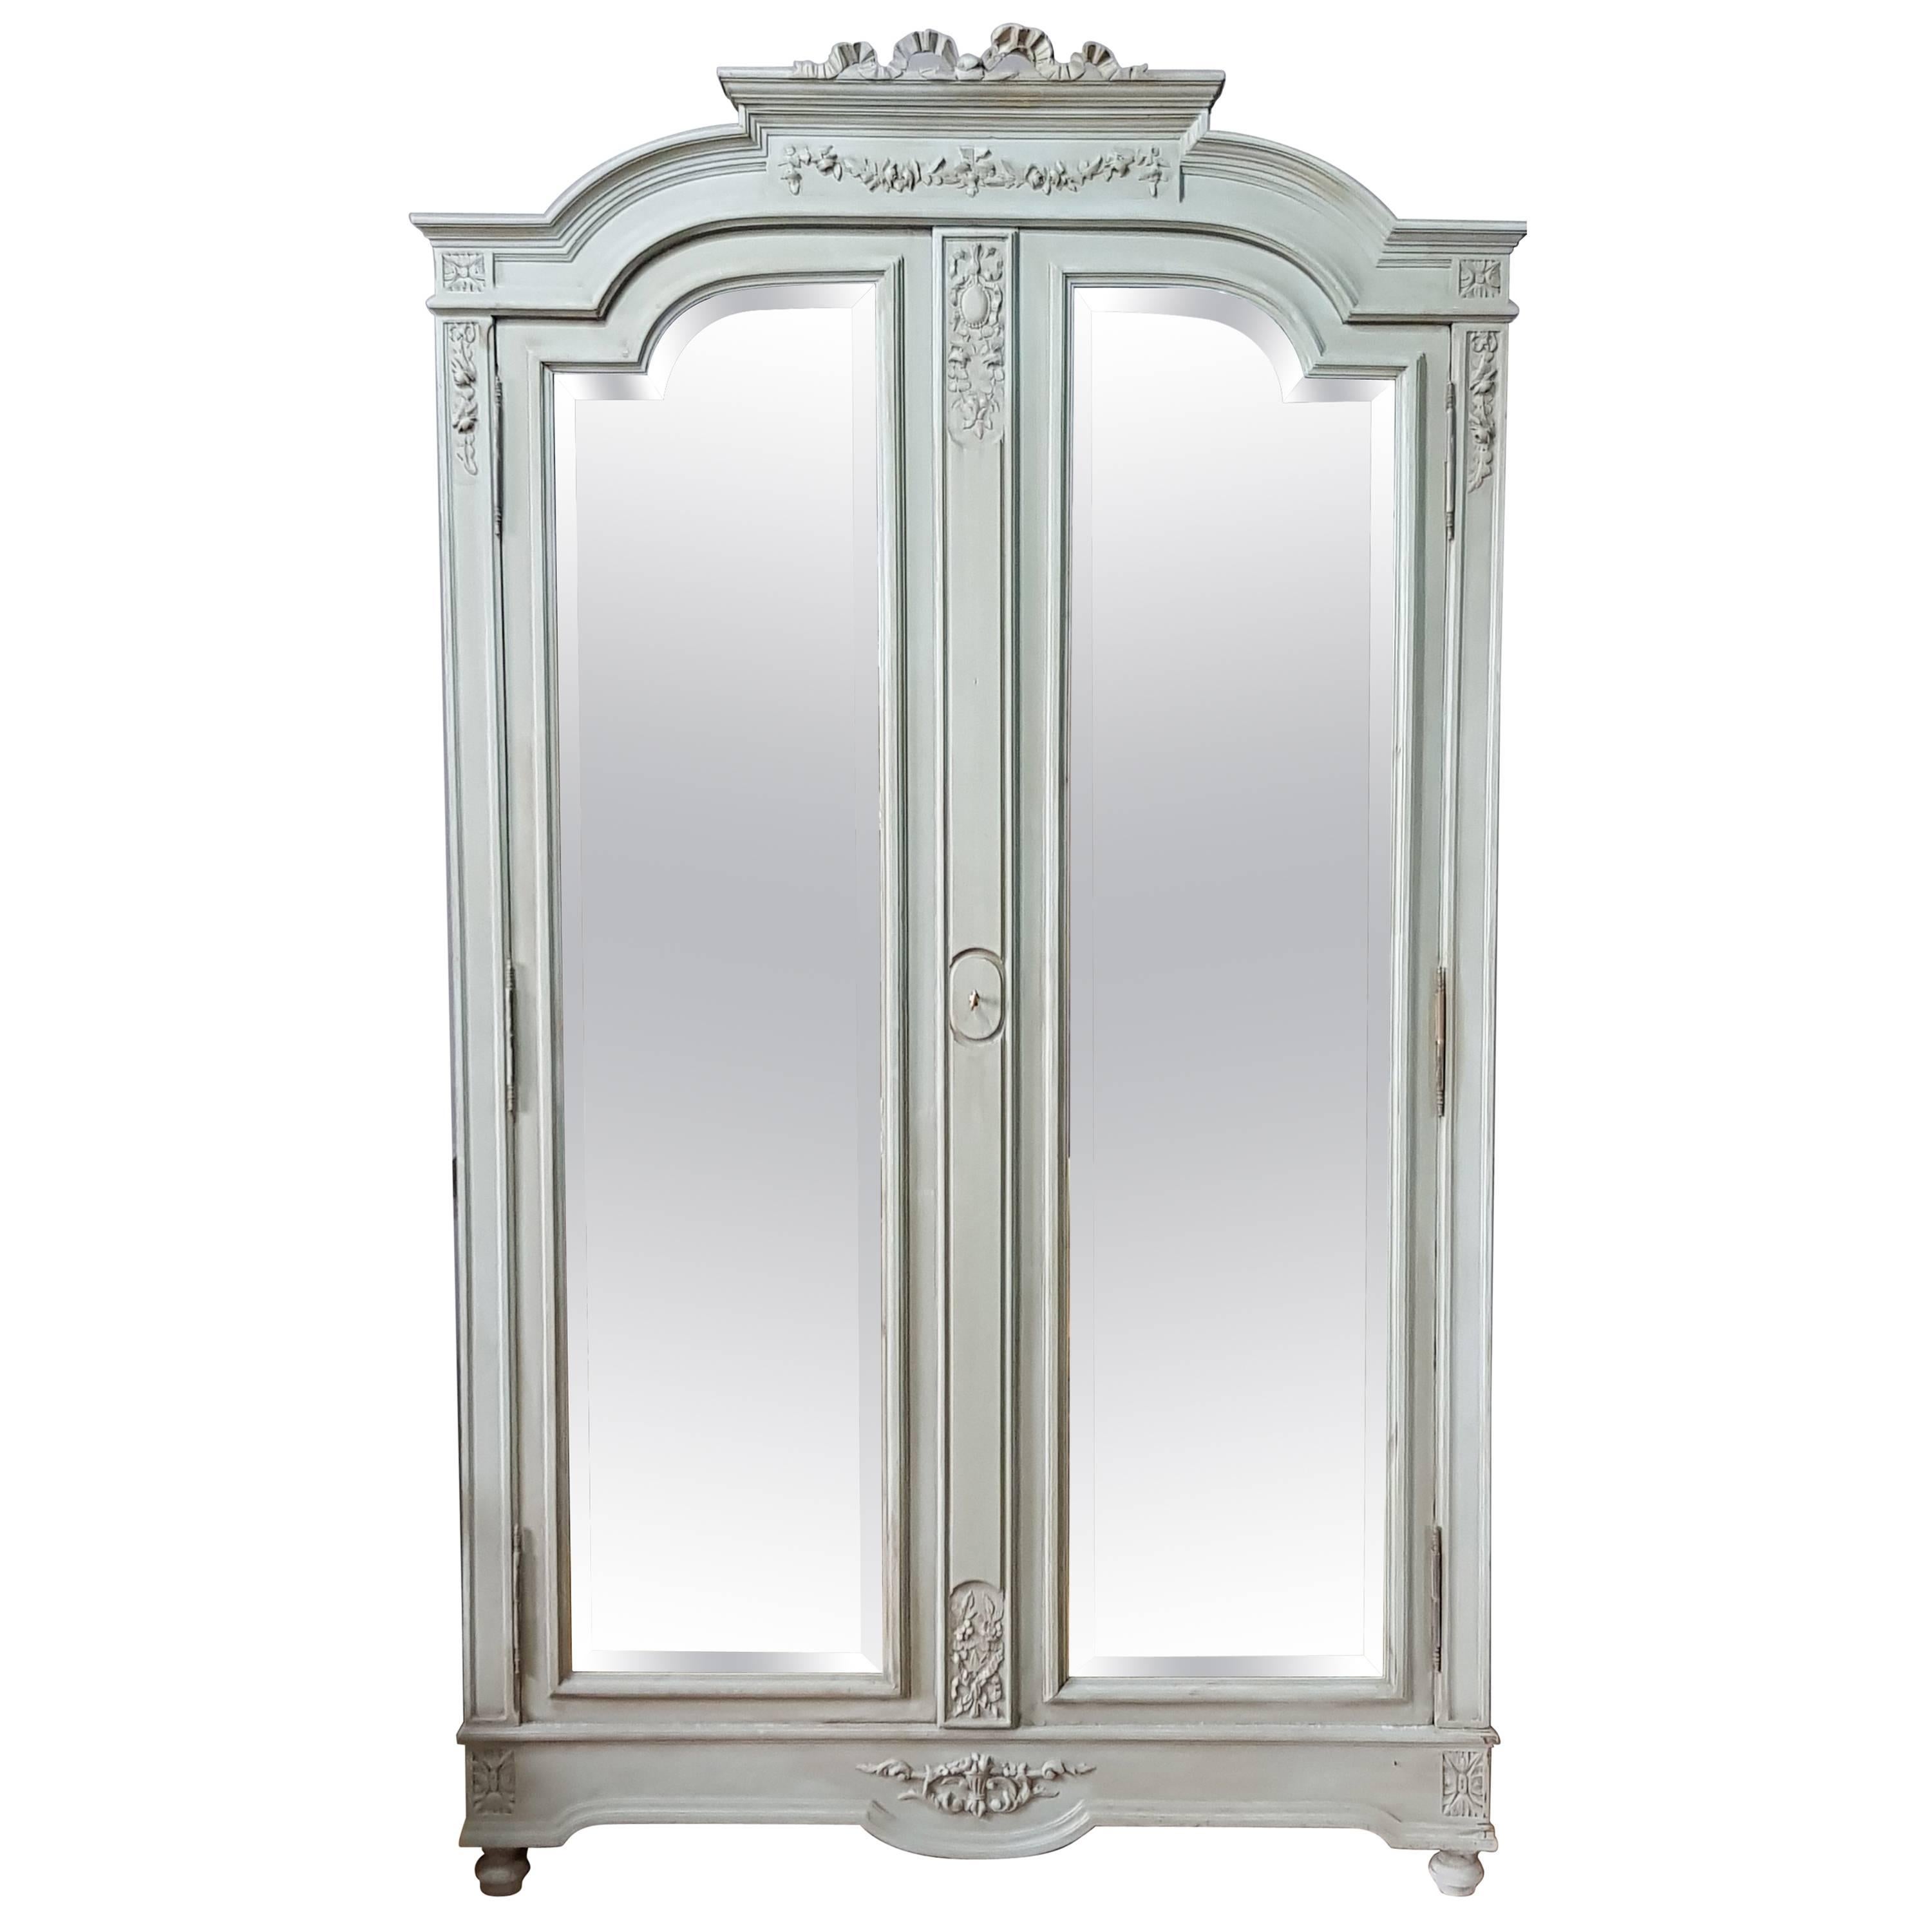 19th Century Painted and Distressed Mirrored Door Armoire